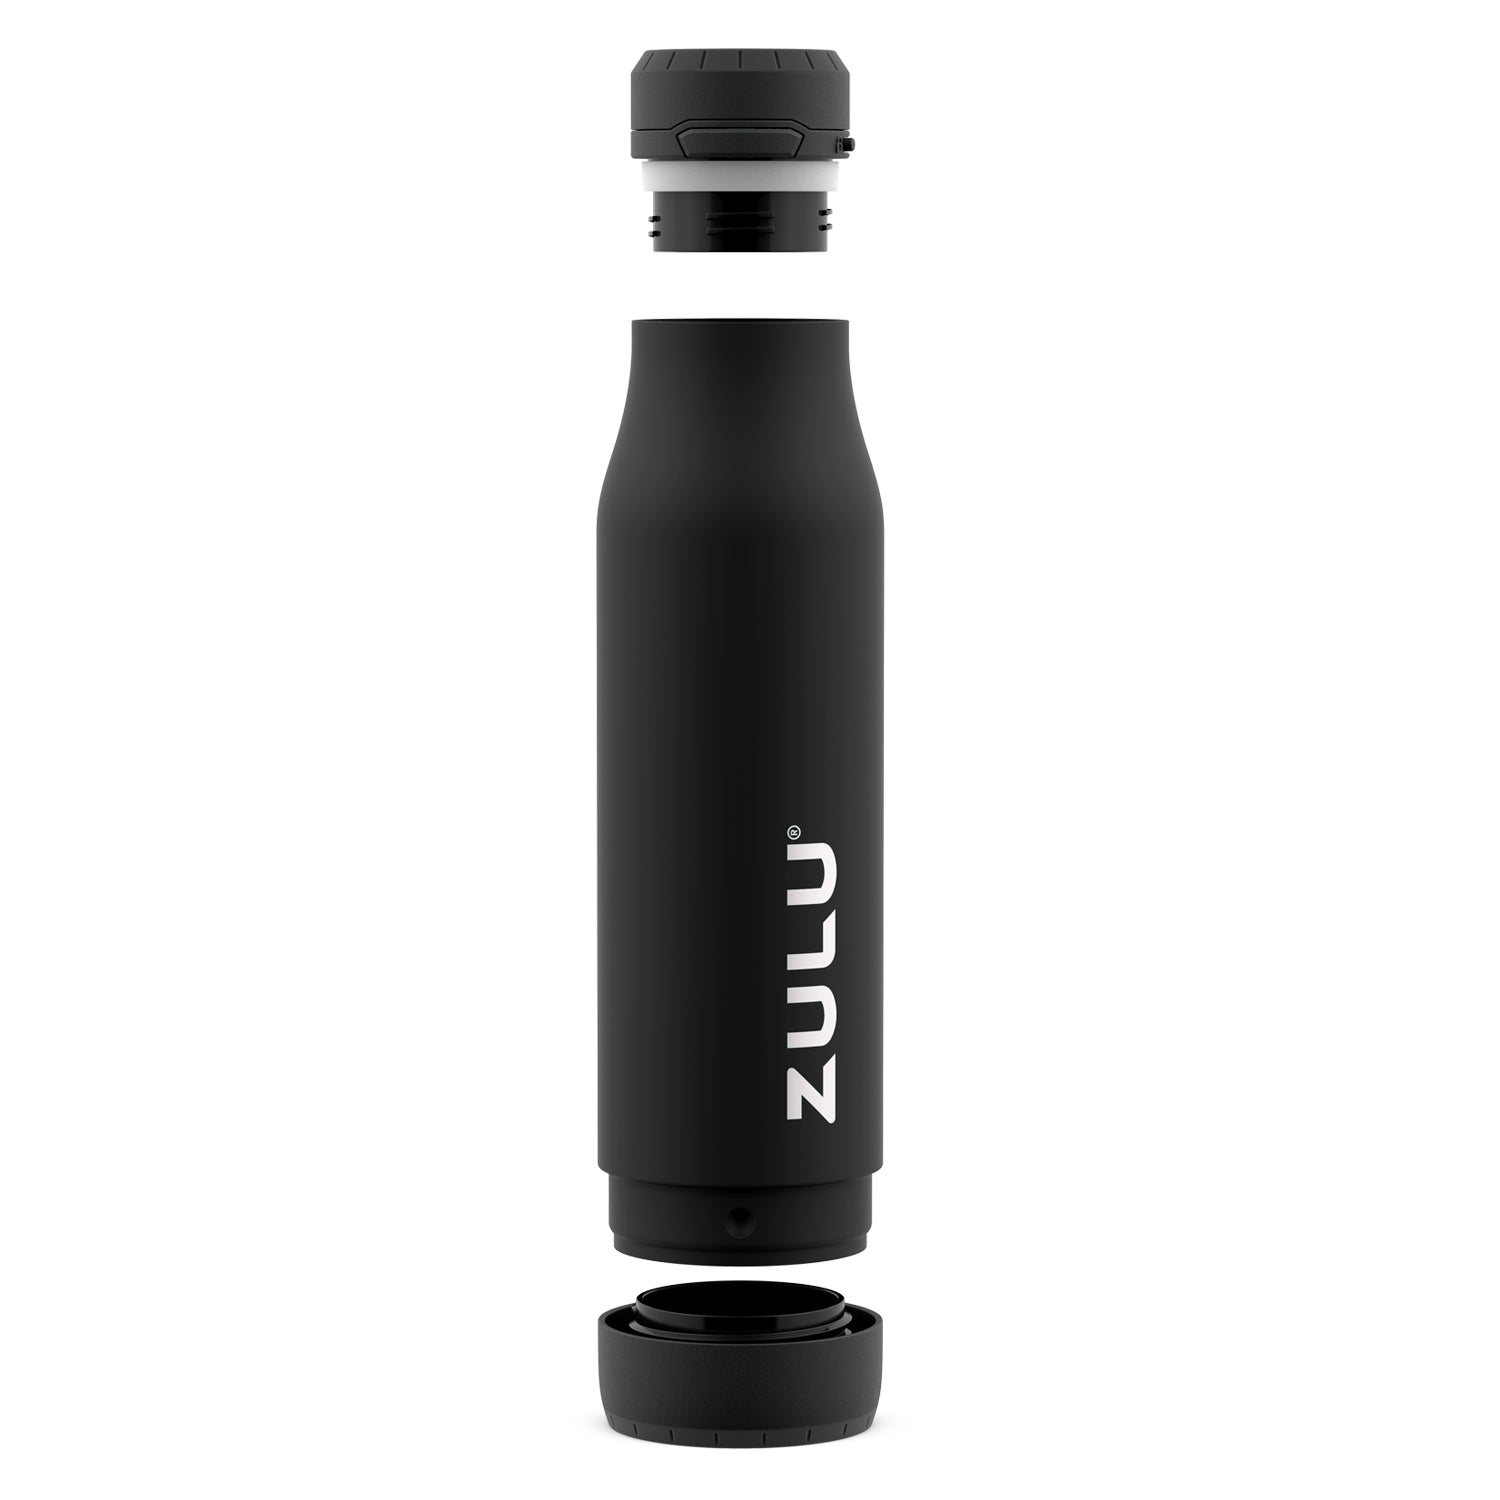 Zulu Ace 24oz Vacuum Insulated Stainless Steel Water Bottle with Chug  Spout, Leak-Proof Locking Lid and Removable Base, Metal Reusable Bottle for